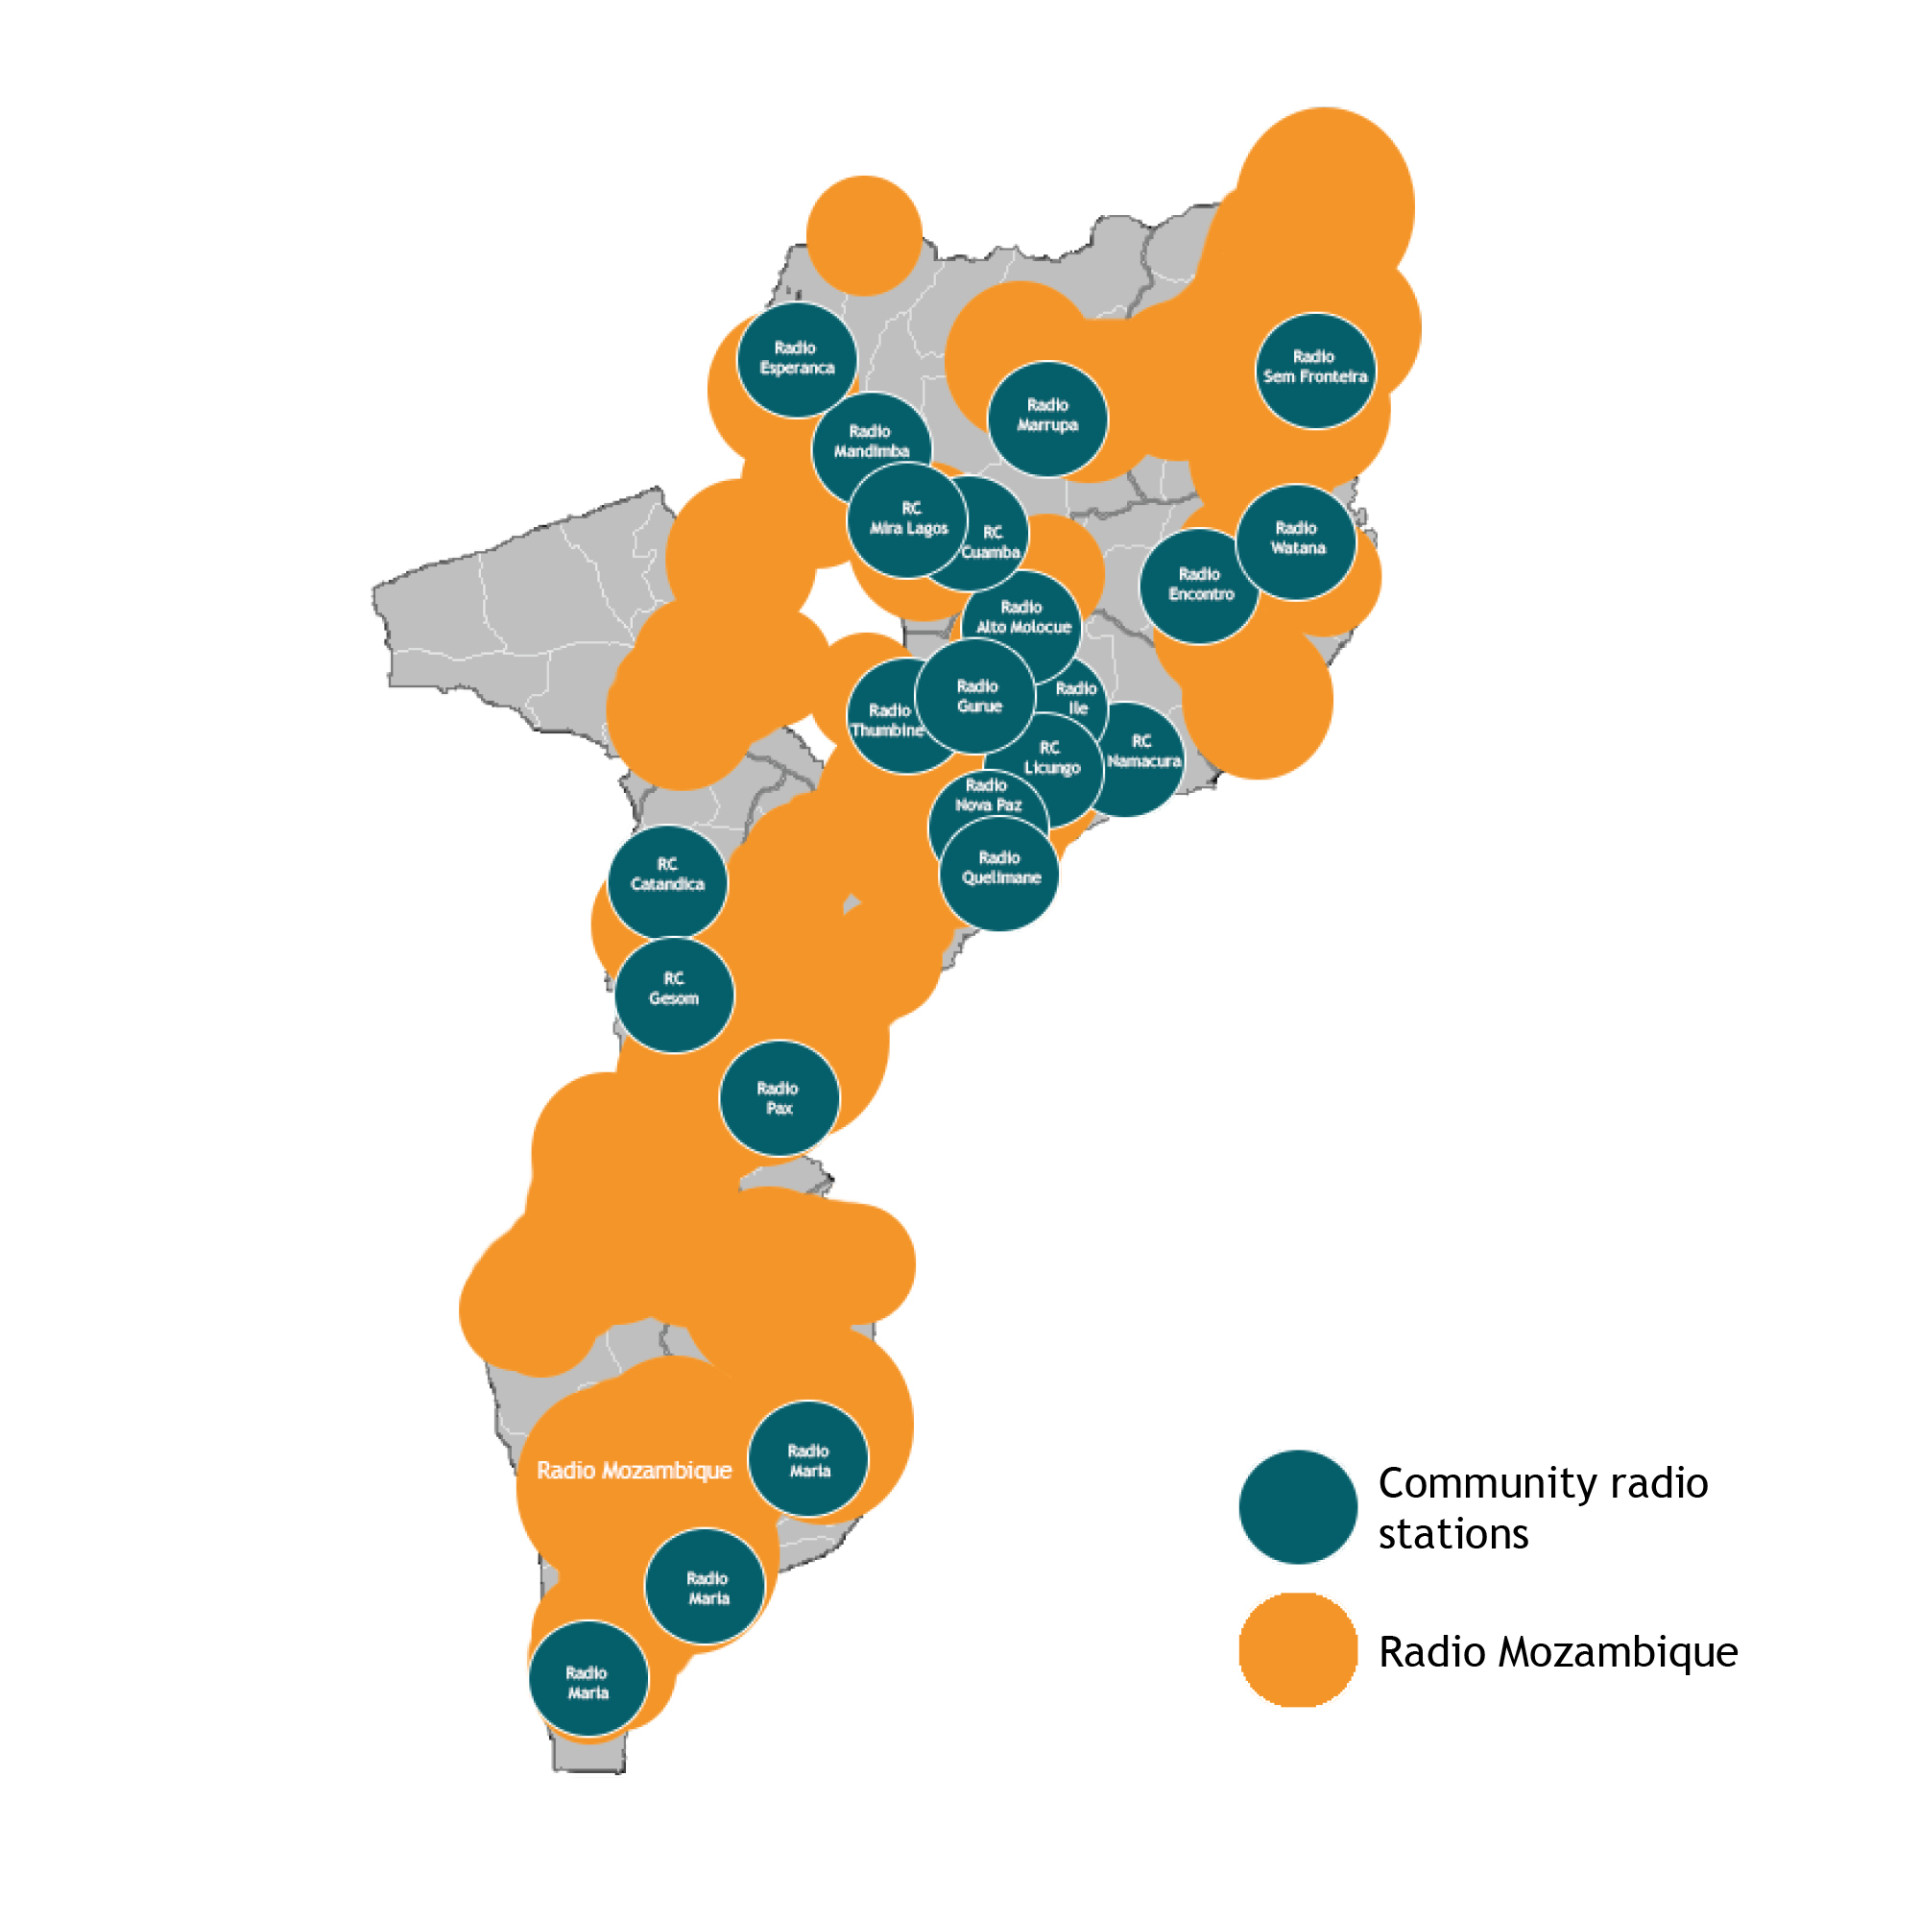 Map of Mozambique highlighting the reach of community radio stations and radio Mozambique